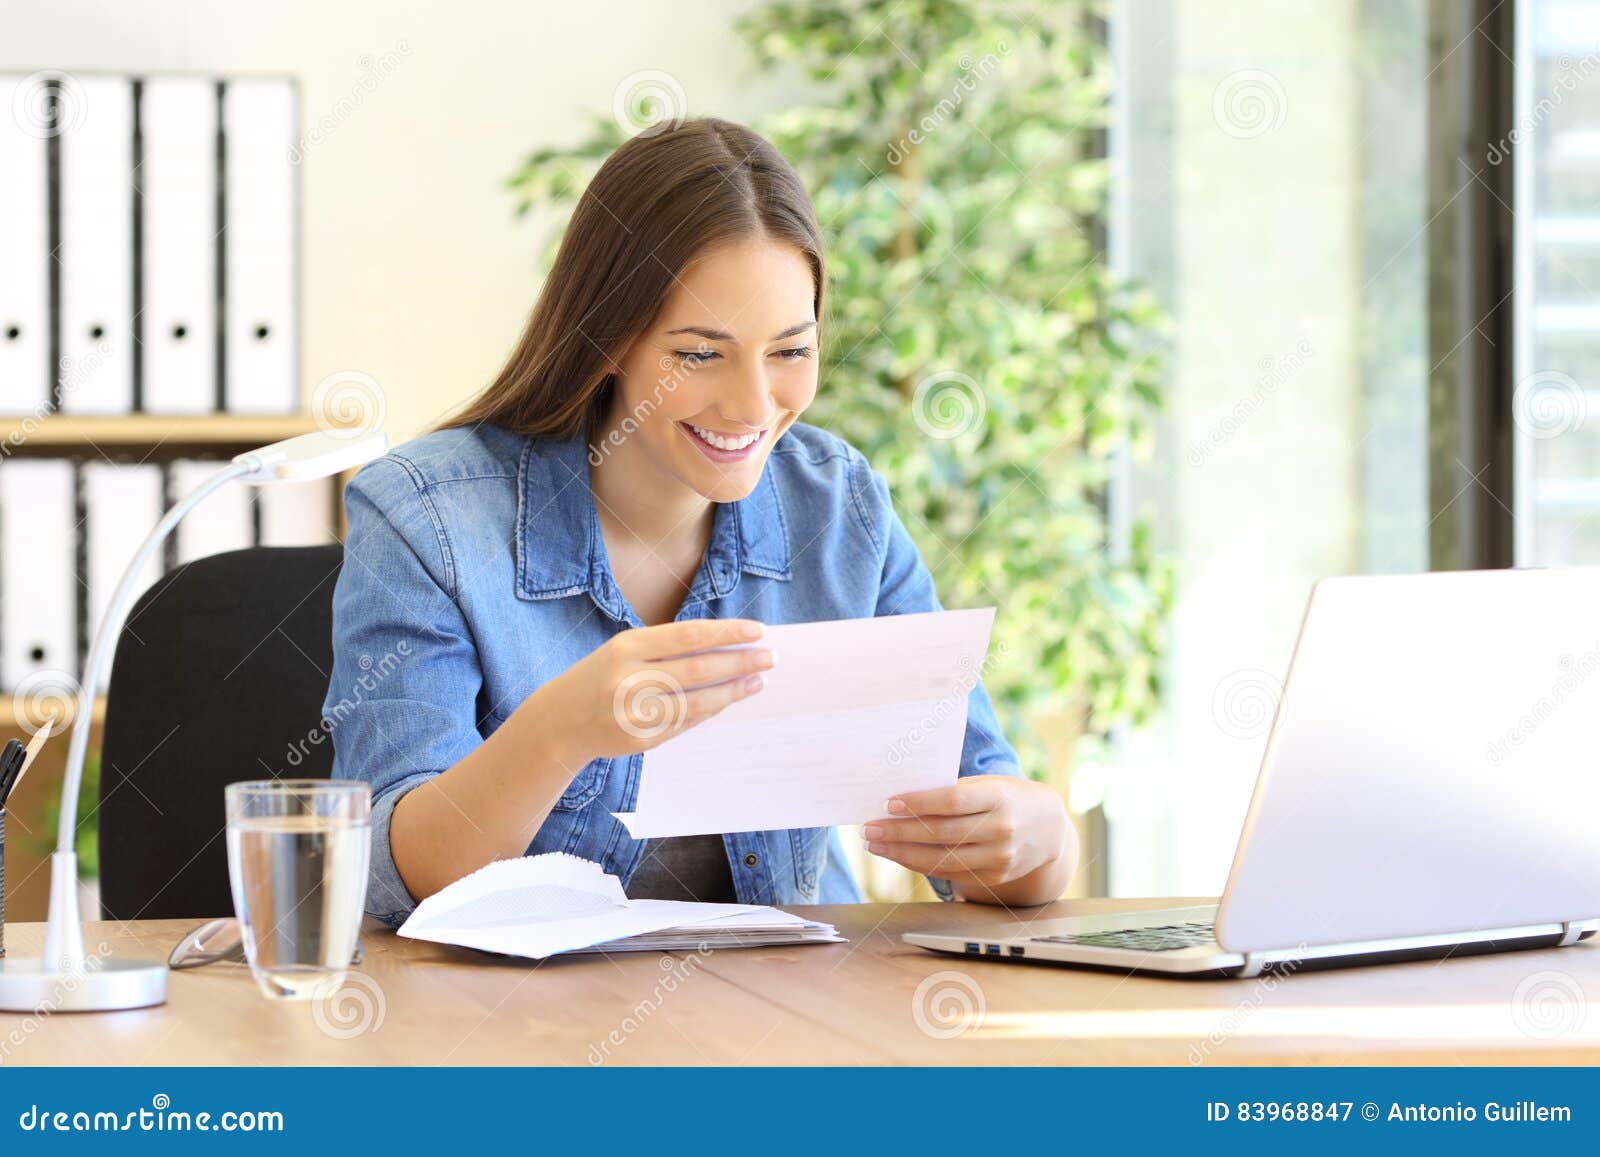 Entrepreneur Woman Reading A Letter At Office Stock Photo 